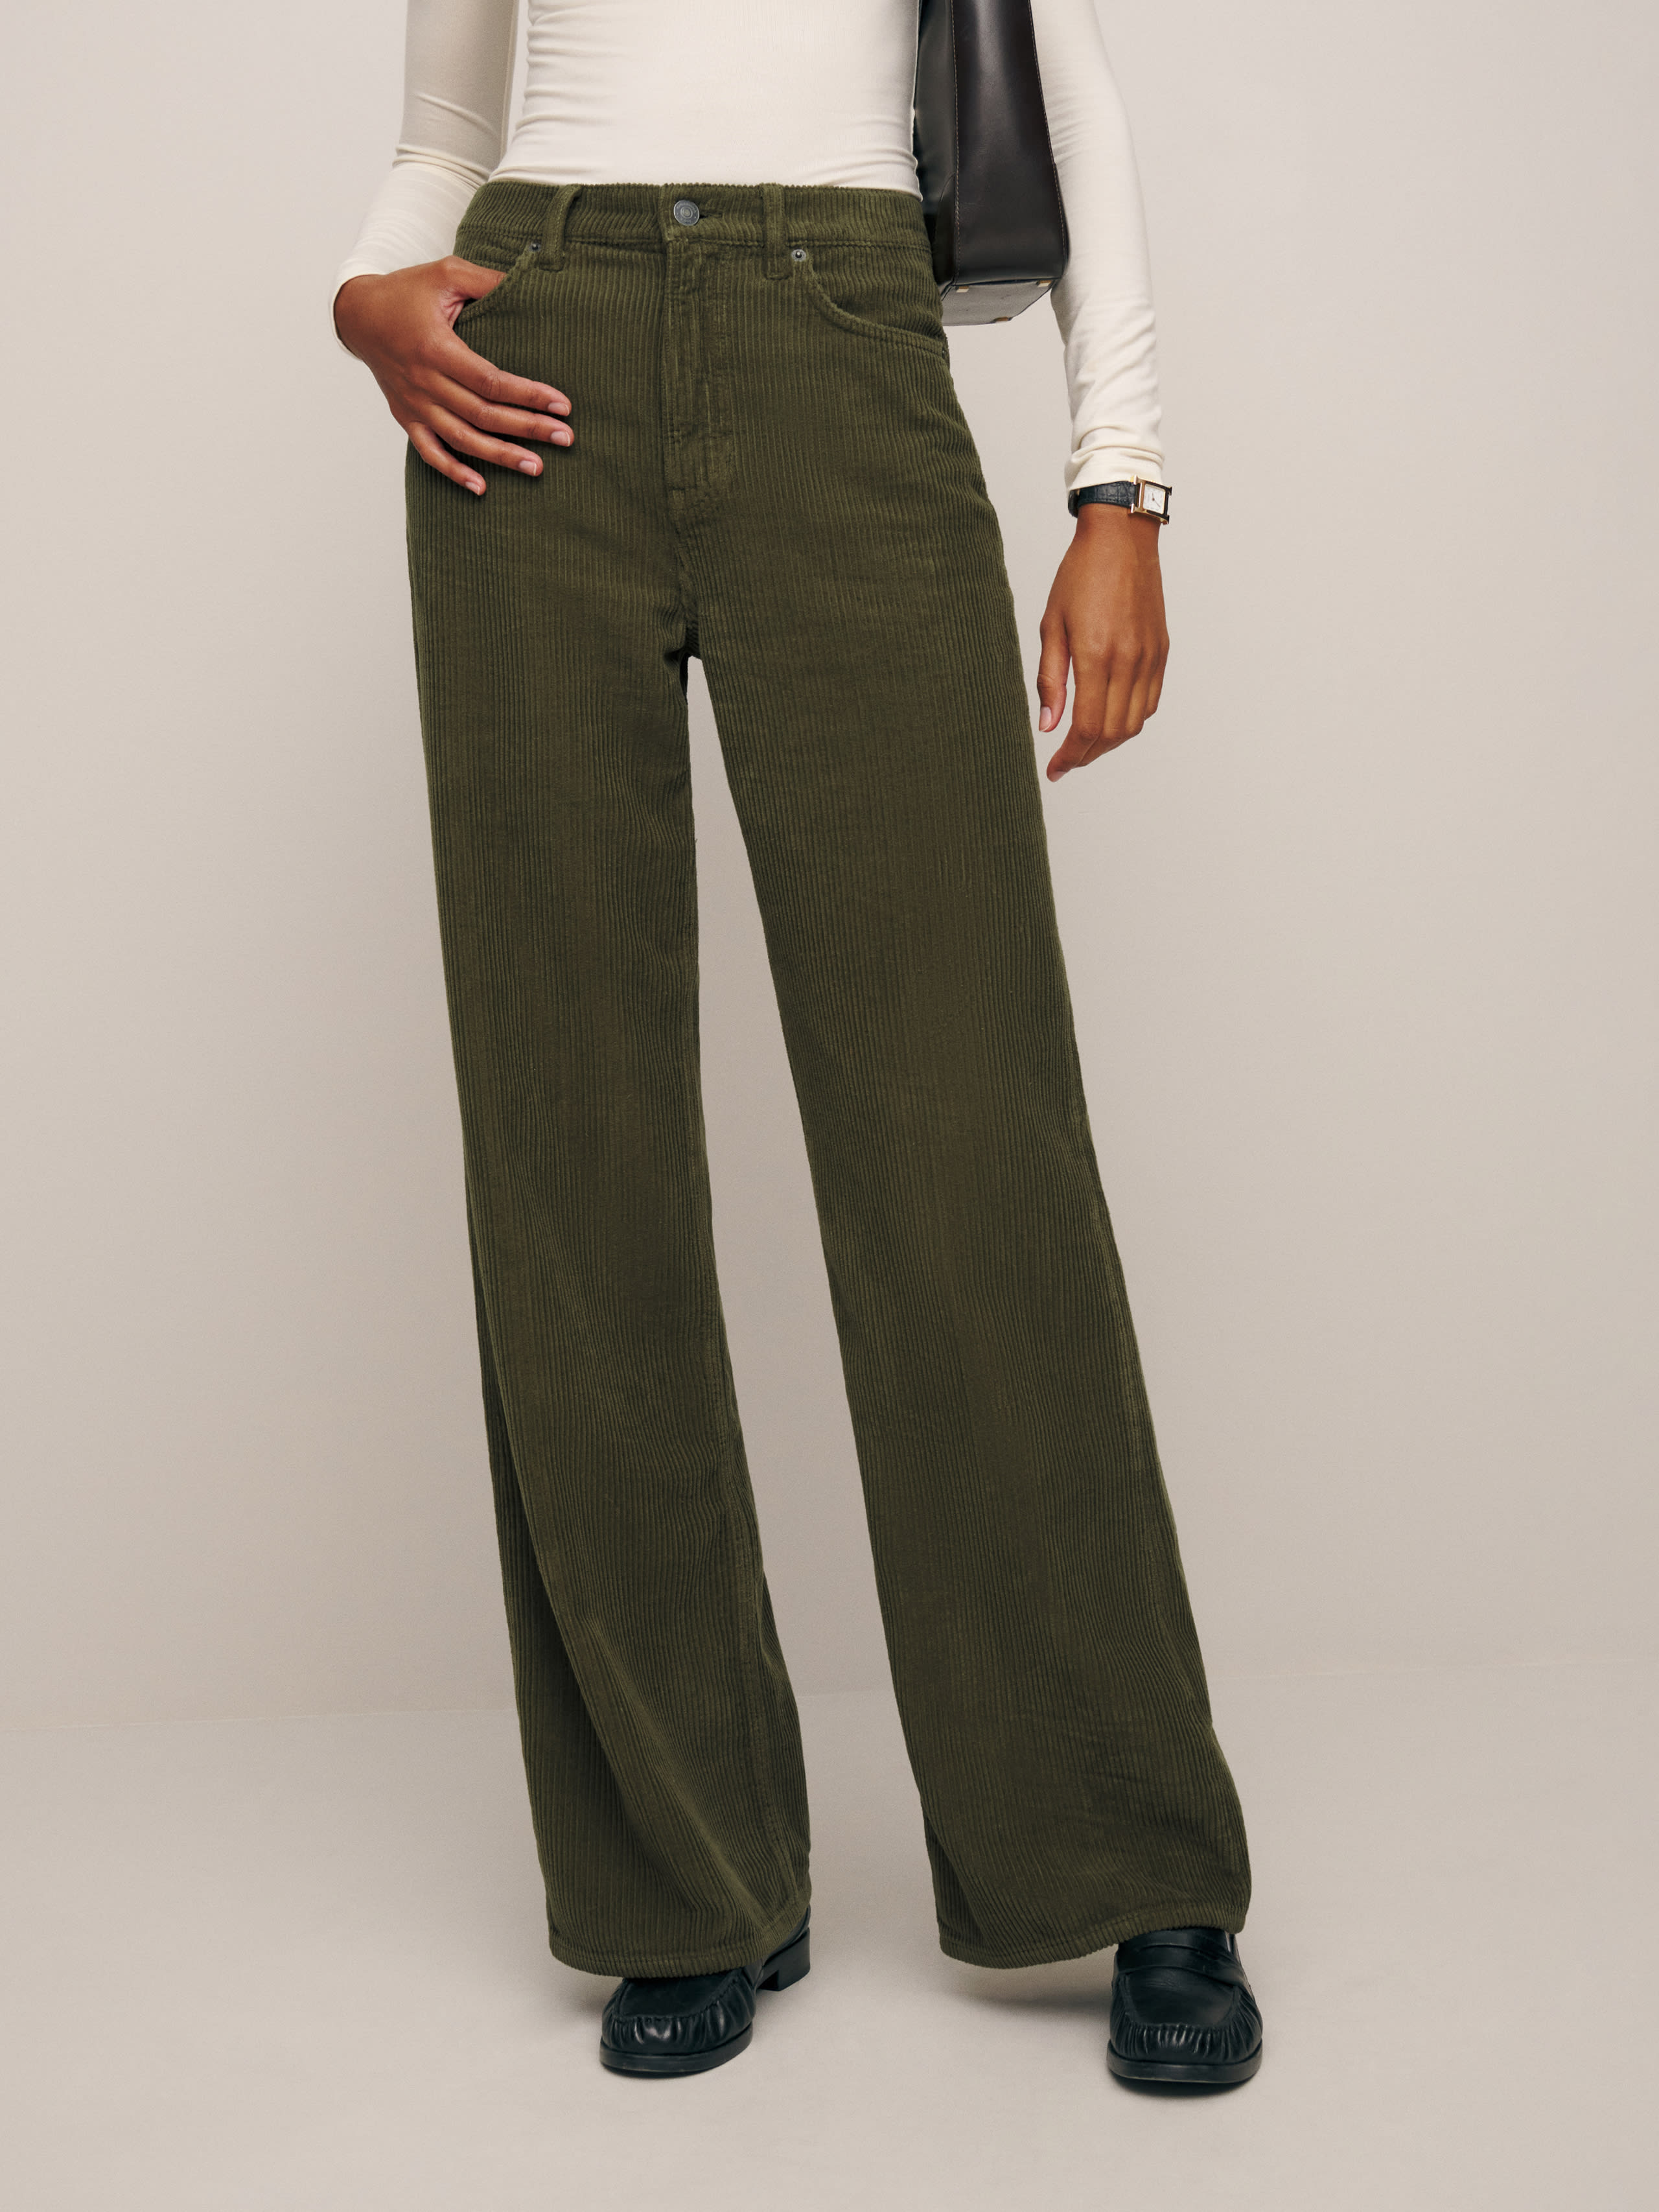 Reformation Cary High Rise Slouchy Wide Leg Corduroy Trousers In Dark Olive